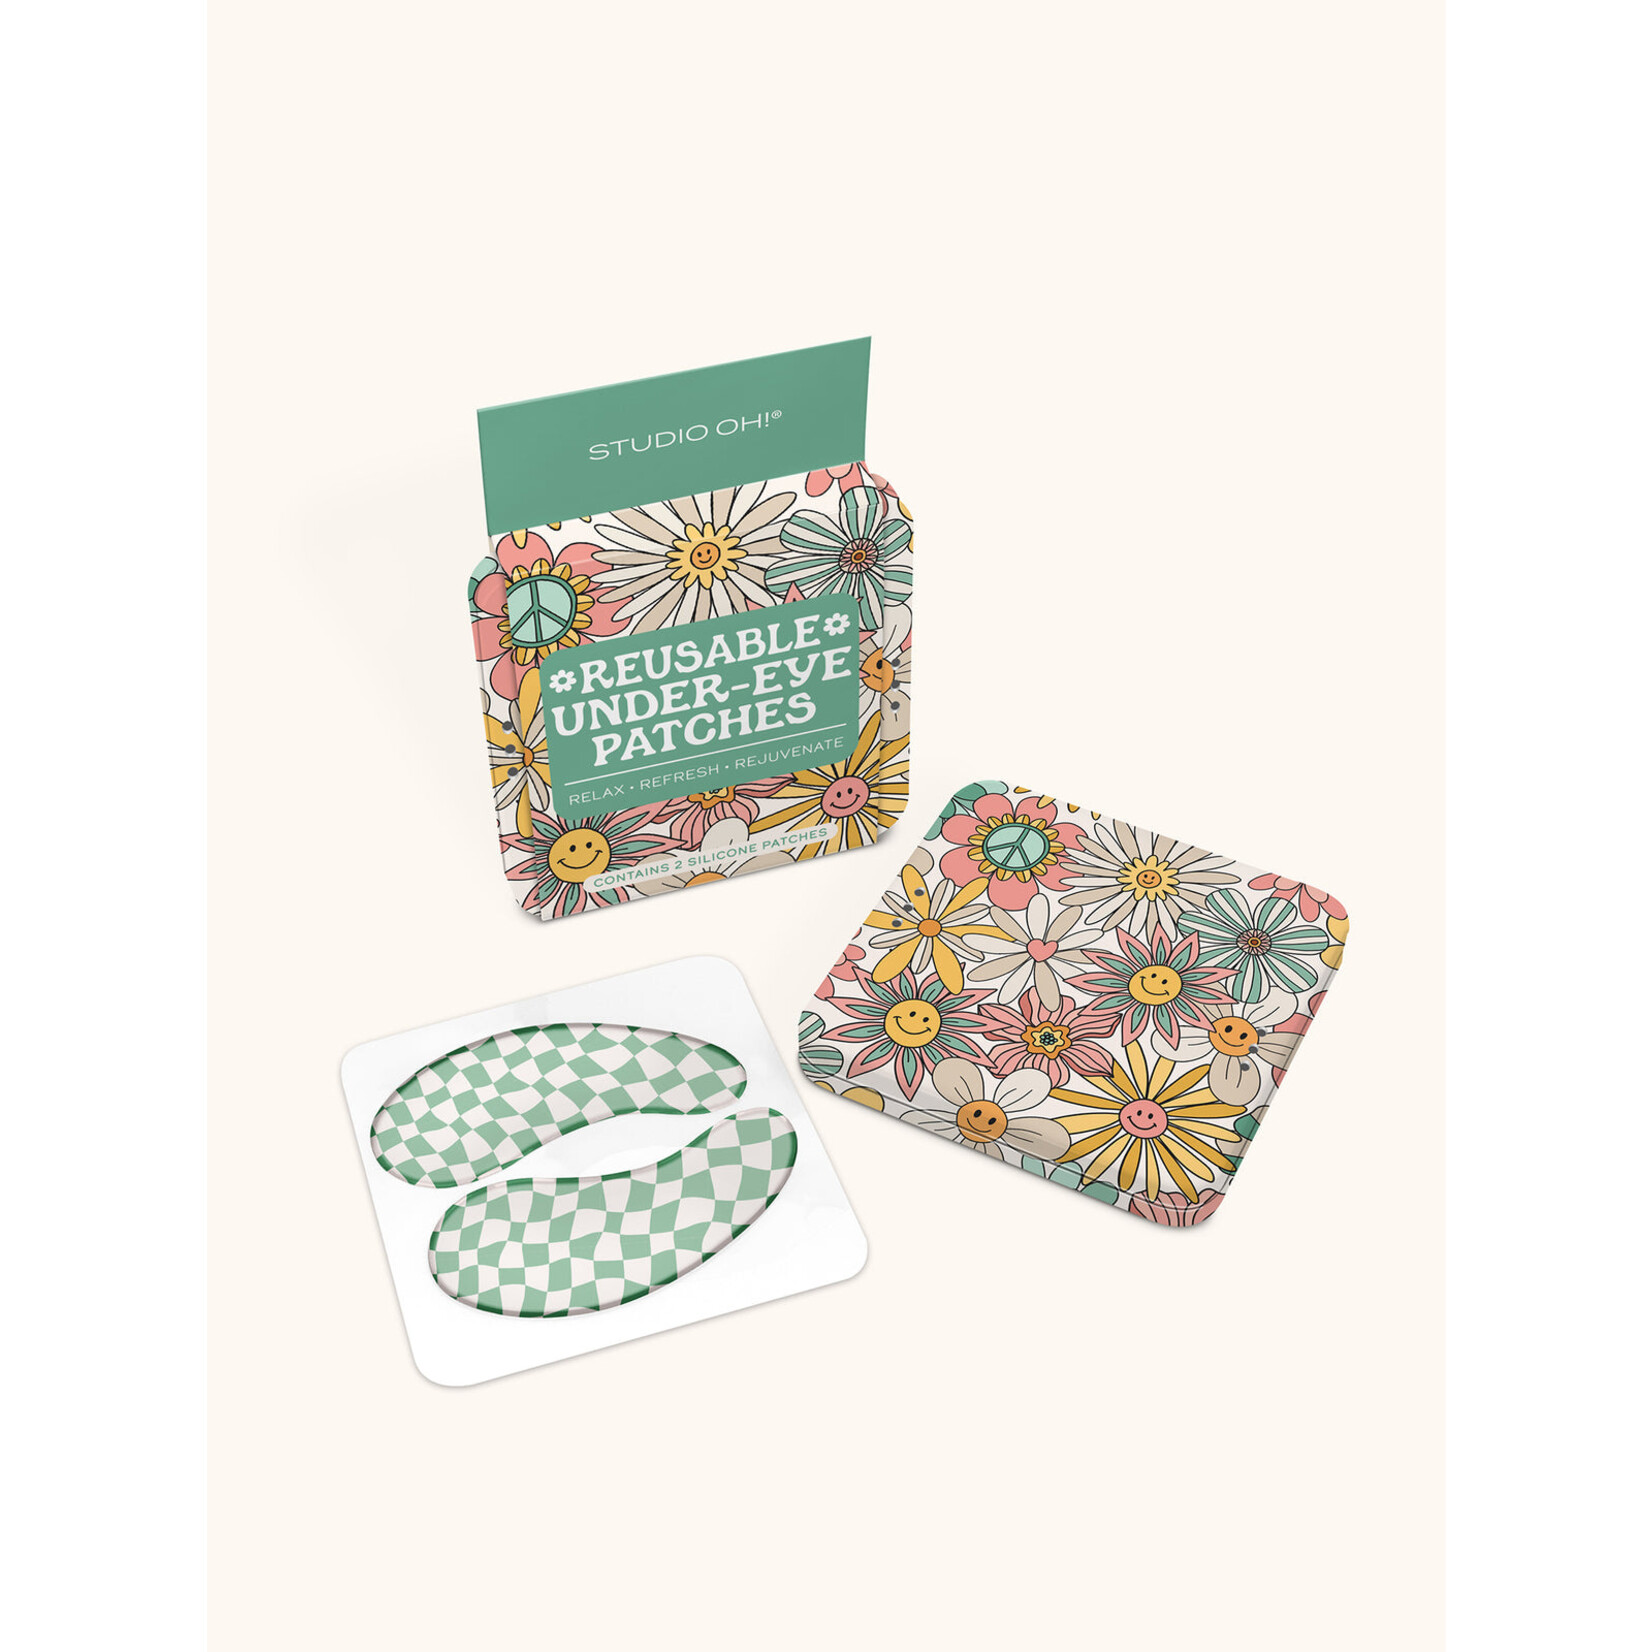 Beemin' Blooms Reusable Under Eye Patches